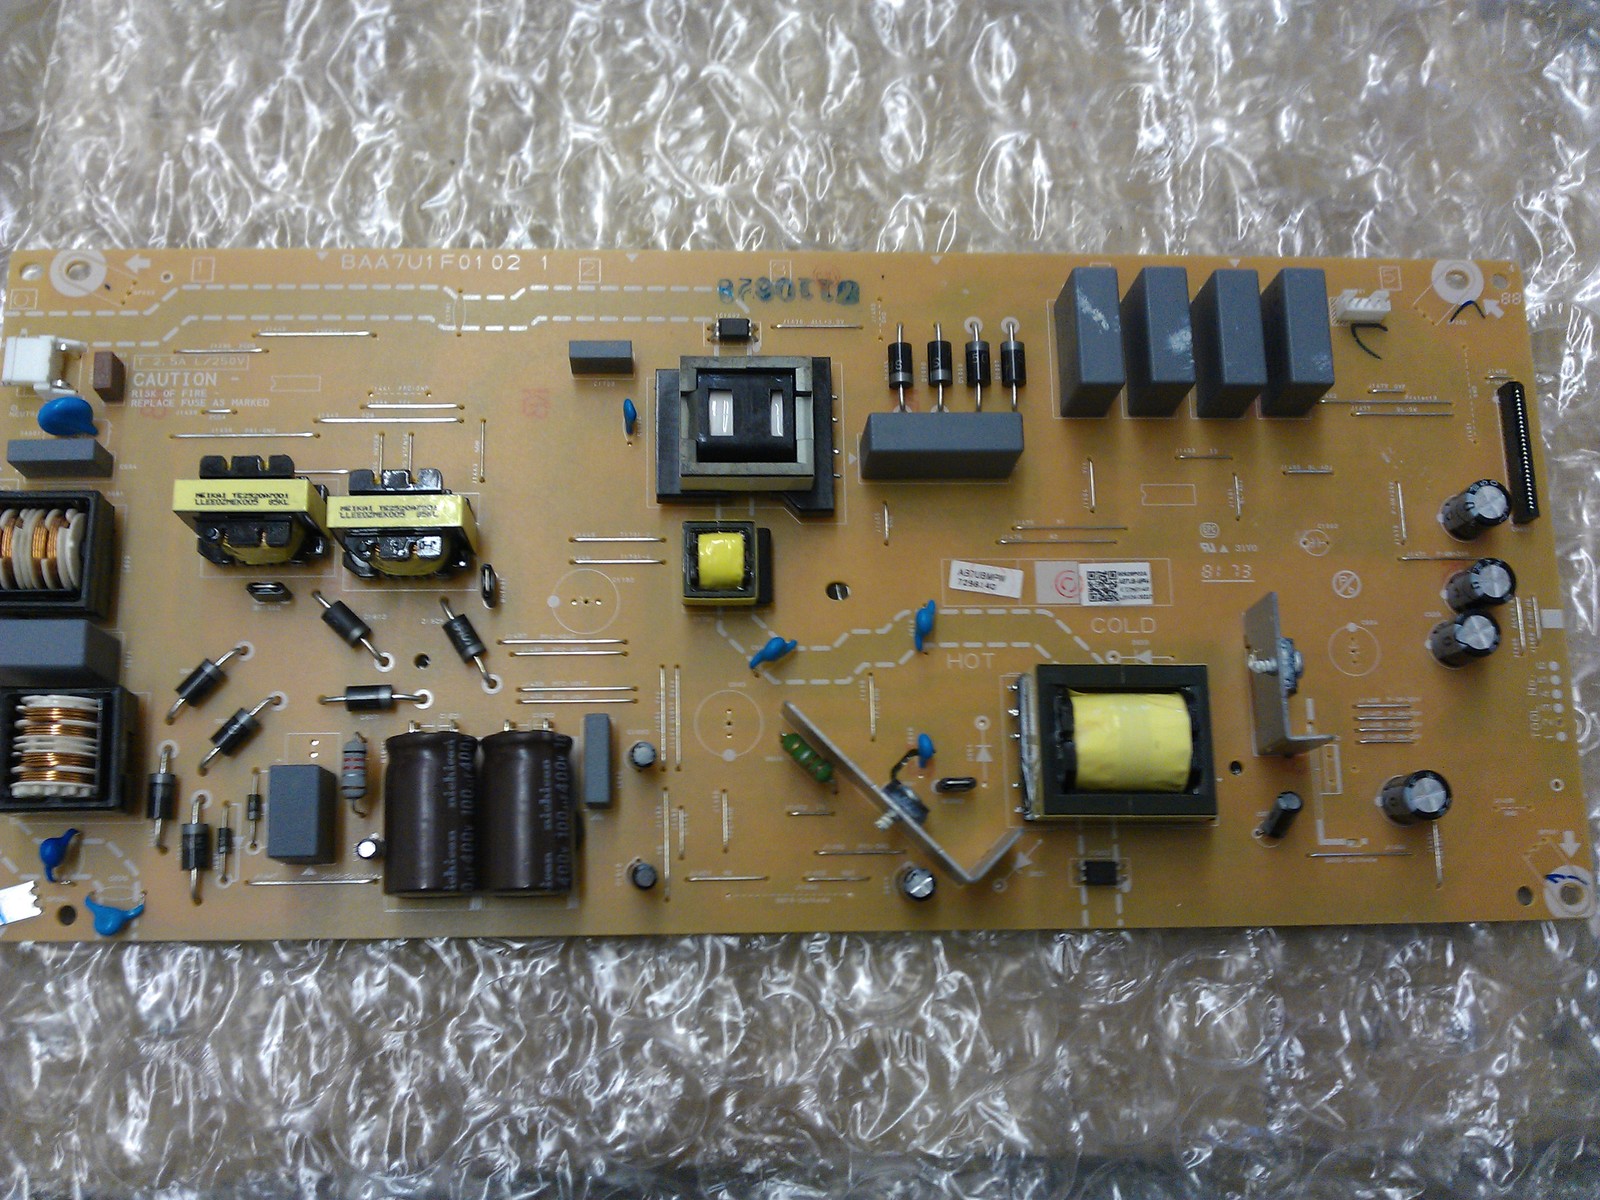 * AB7U1MPW-001 ABUBMPW Power Supply Board From Philips 50PFL5703/F7 DS2 LCD TV - $23.95